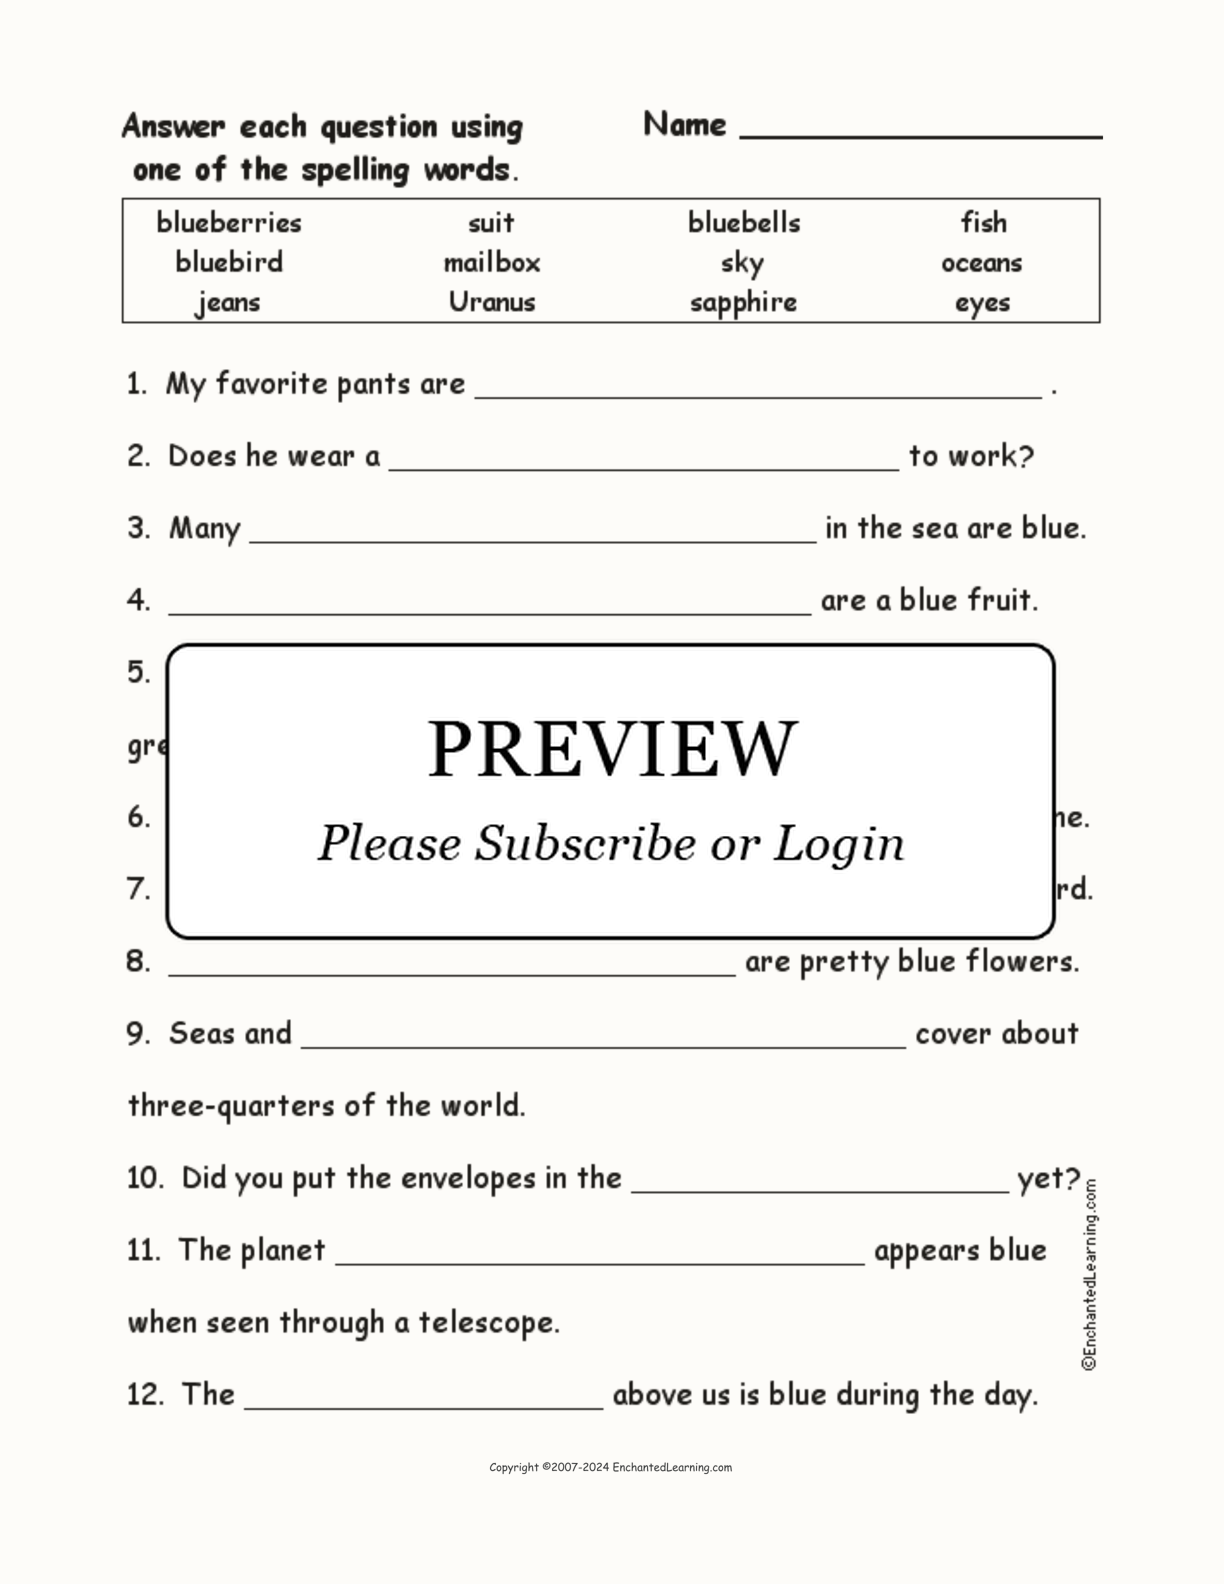 Blue Things: Spelling Word Questions interactive worksheet page 1